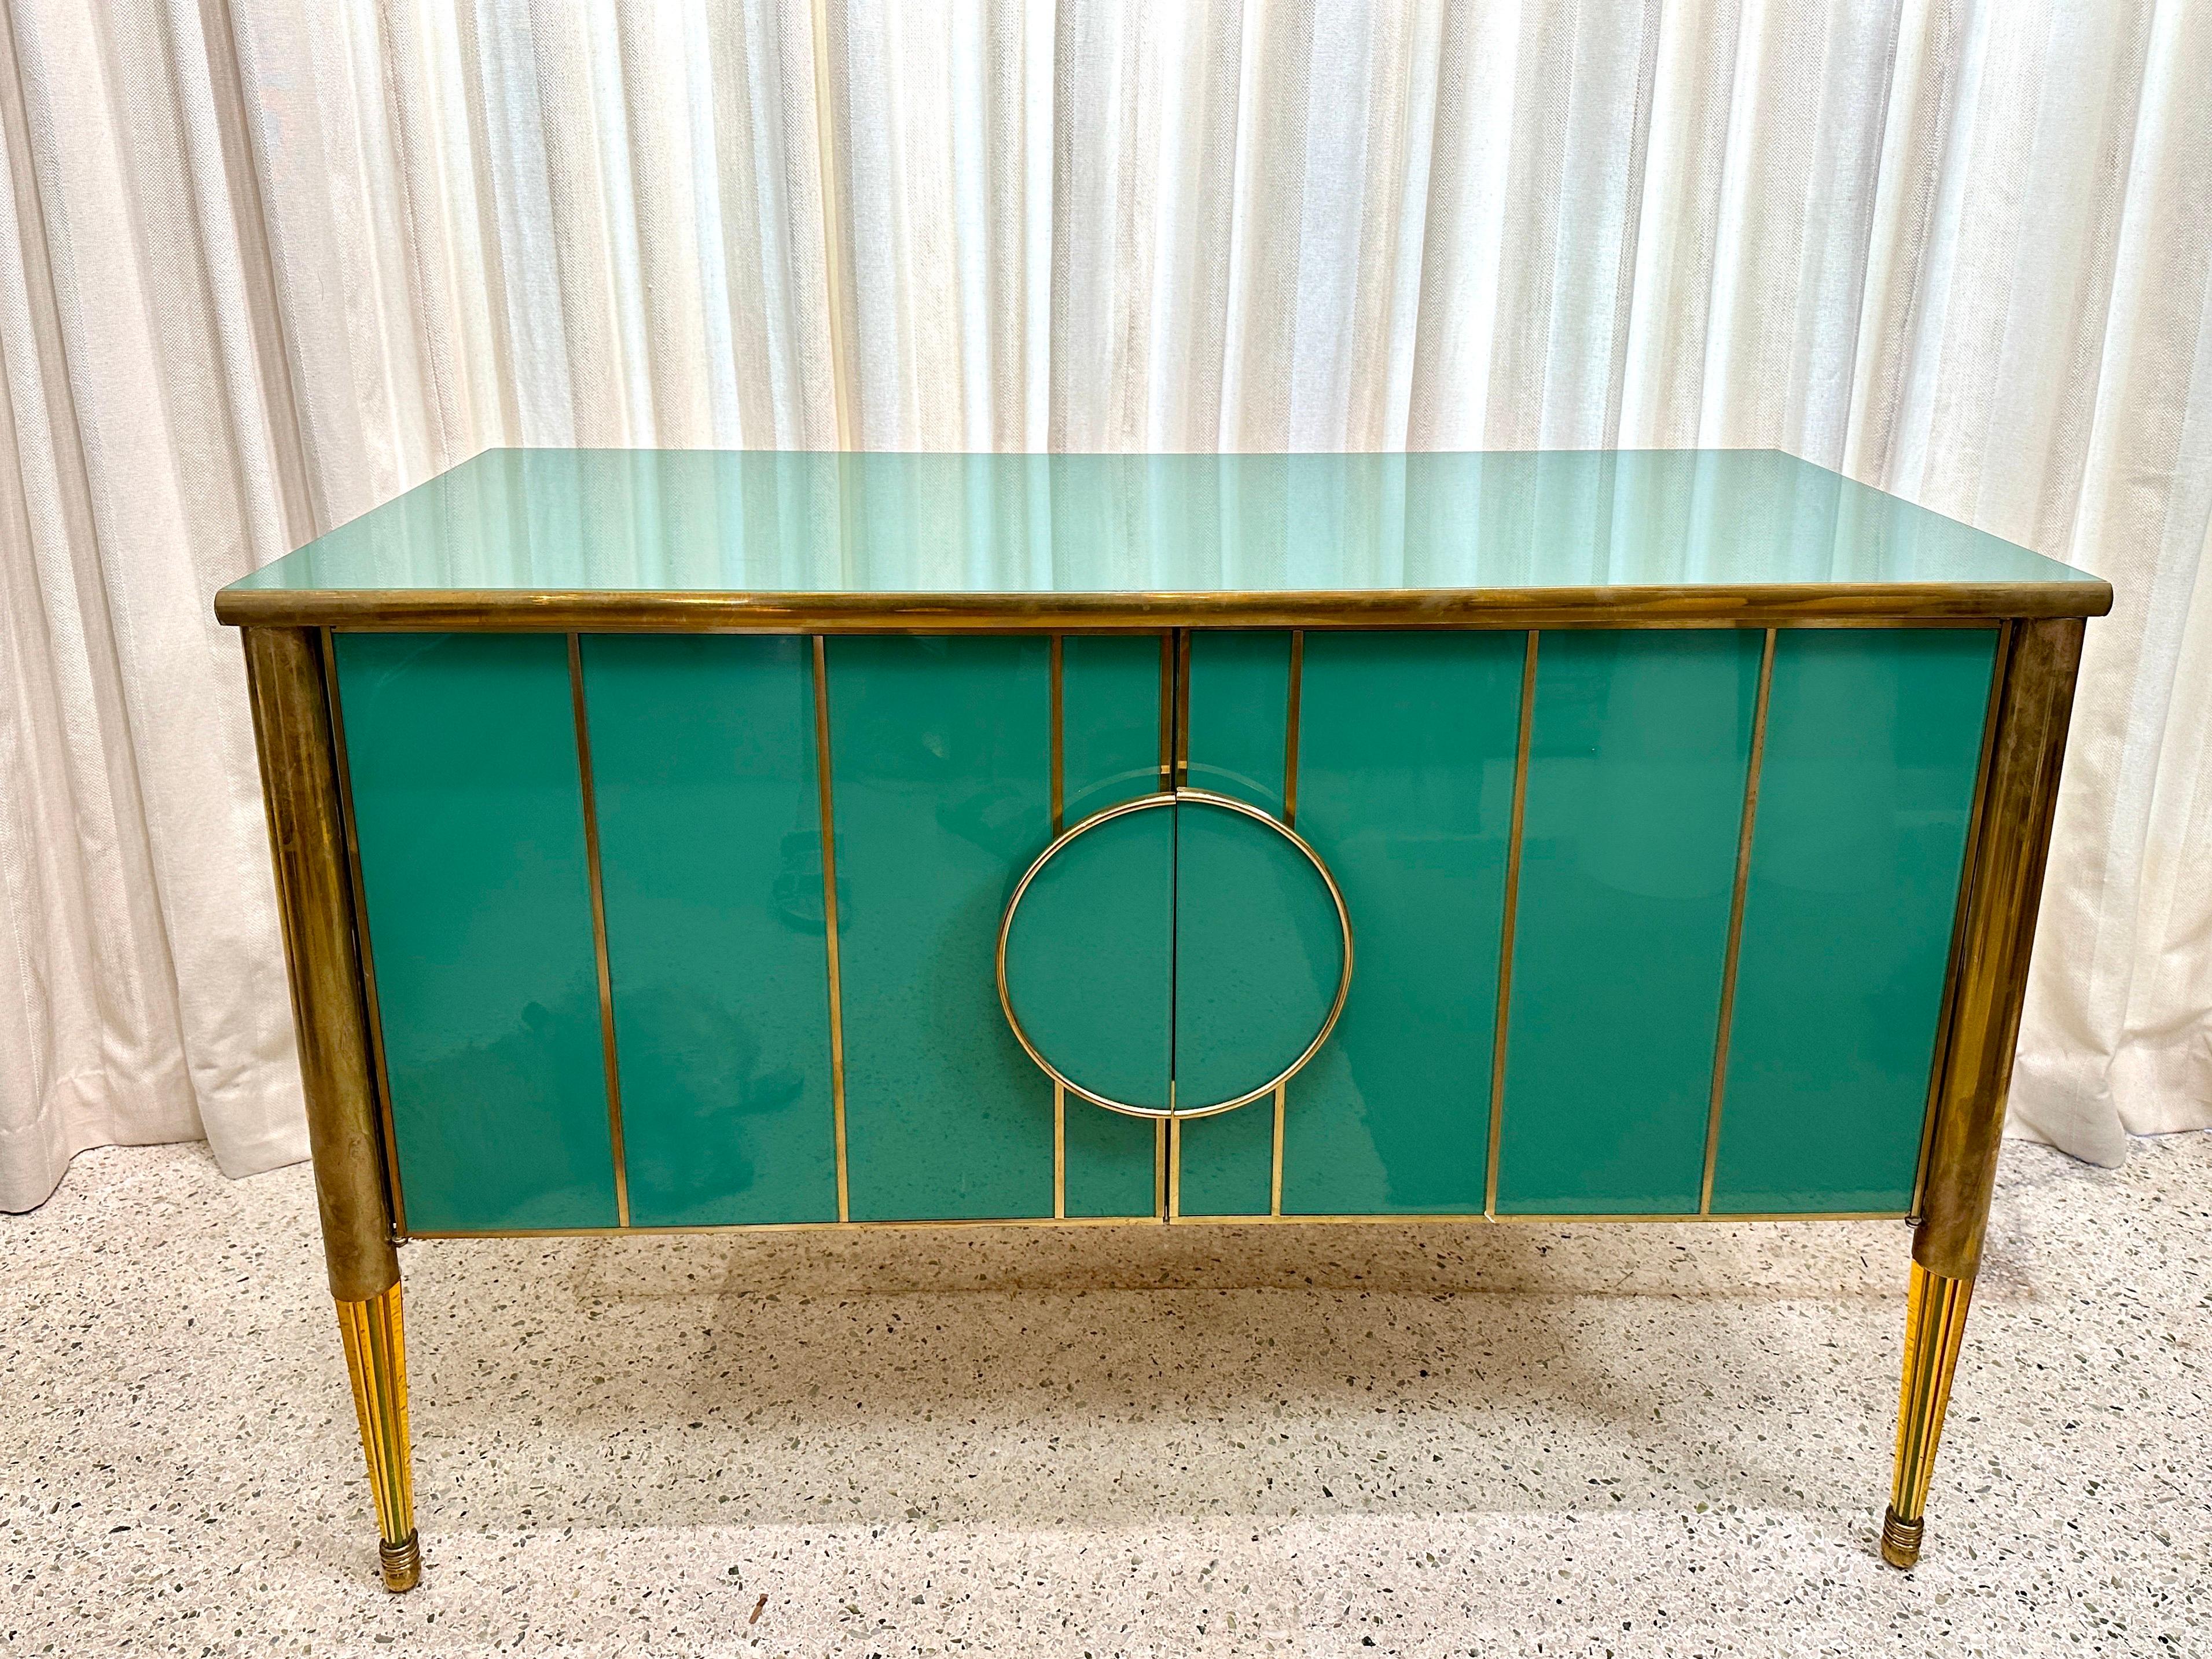 This amazingly crafted 2-door cabinet clad completely in Murano green glass and trimmed with brass, also features wonderful tapering glass legs.  Interior long clear glass shelf.  NOTE:  TWO (2) available, sold separately.  THIS ITEM IS LOCATED AND